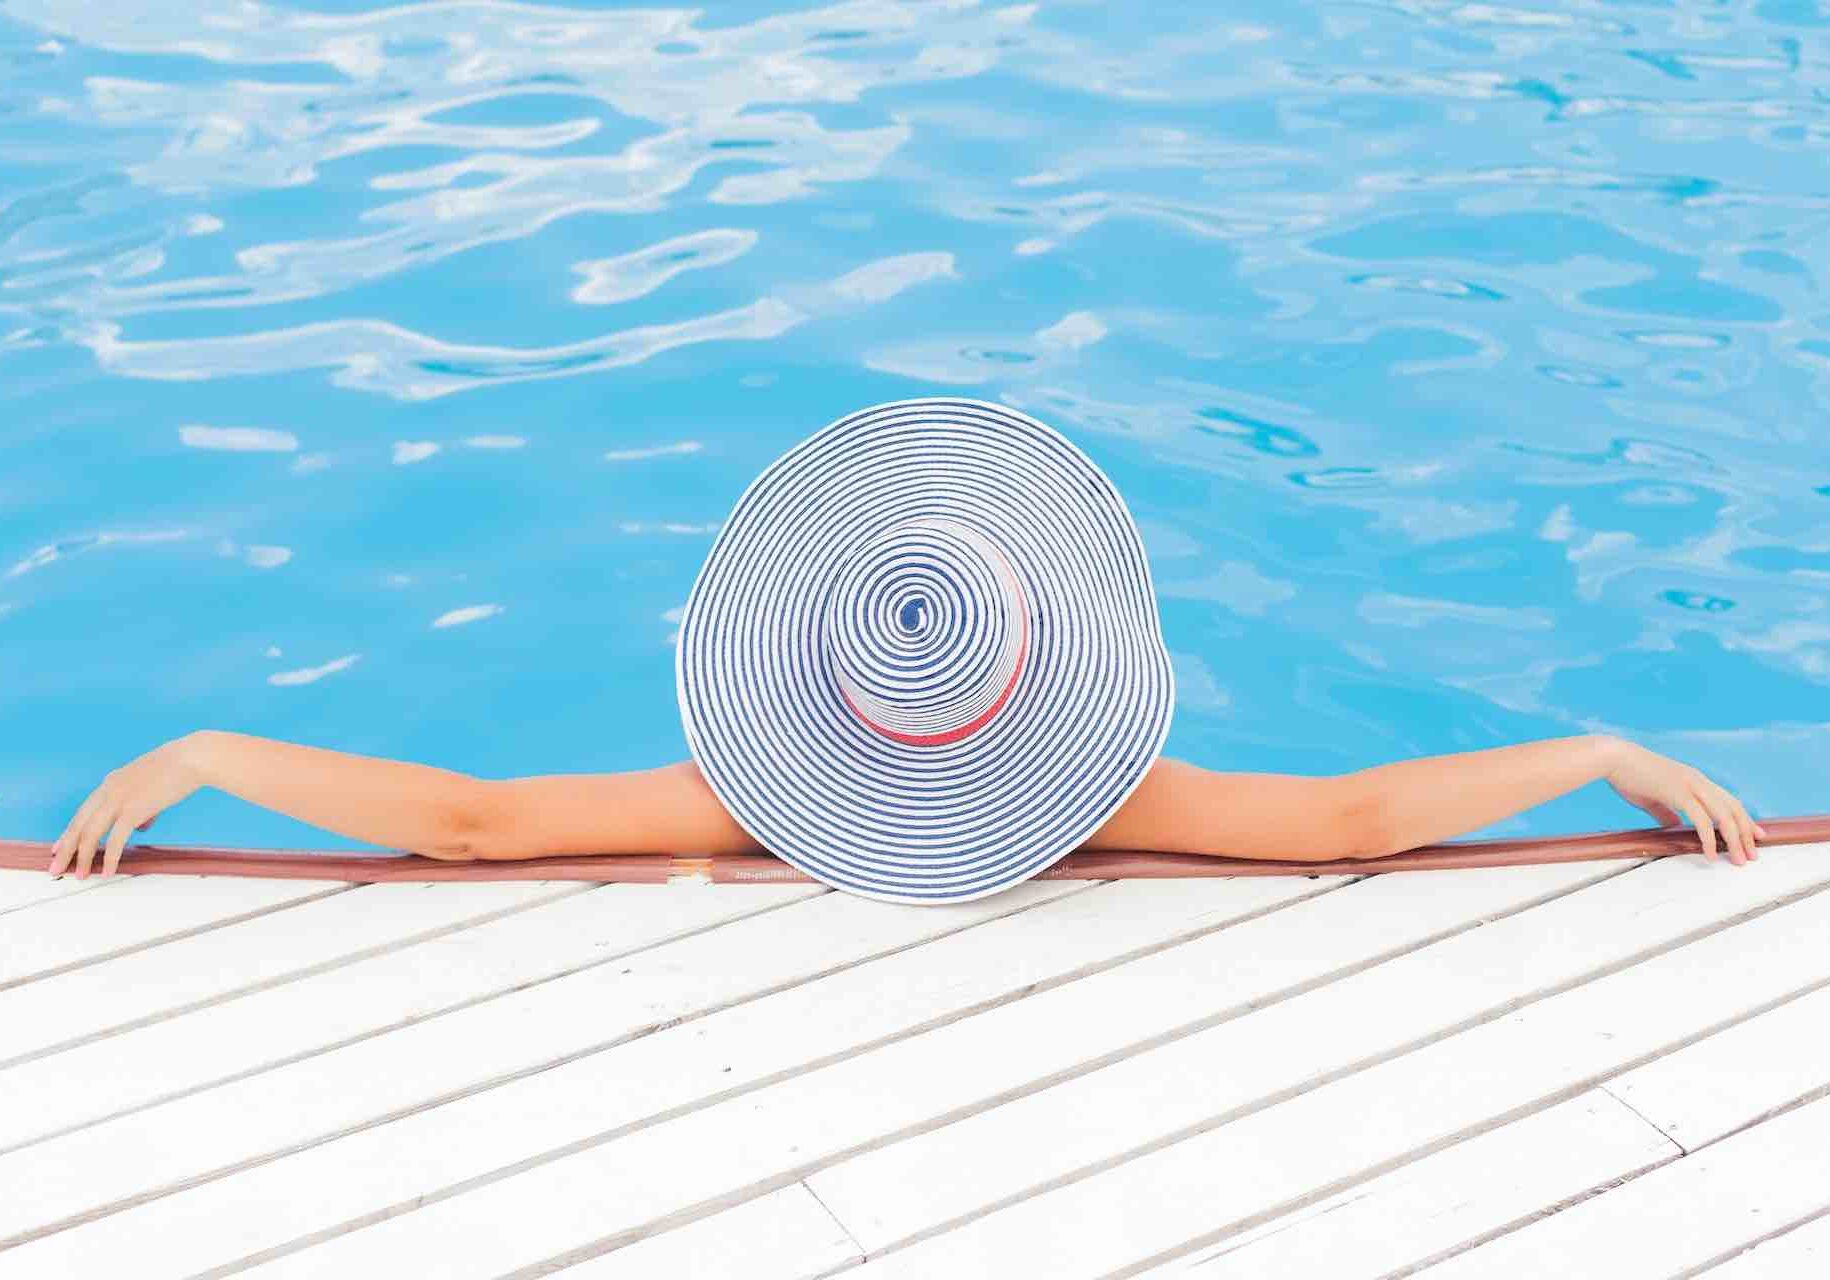 Woman with a hat in a solar heated pool.